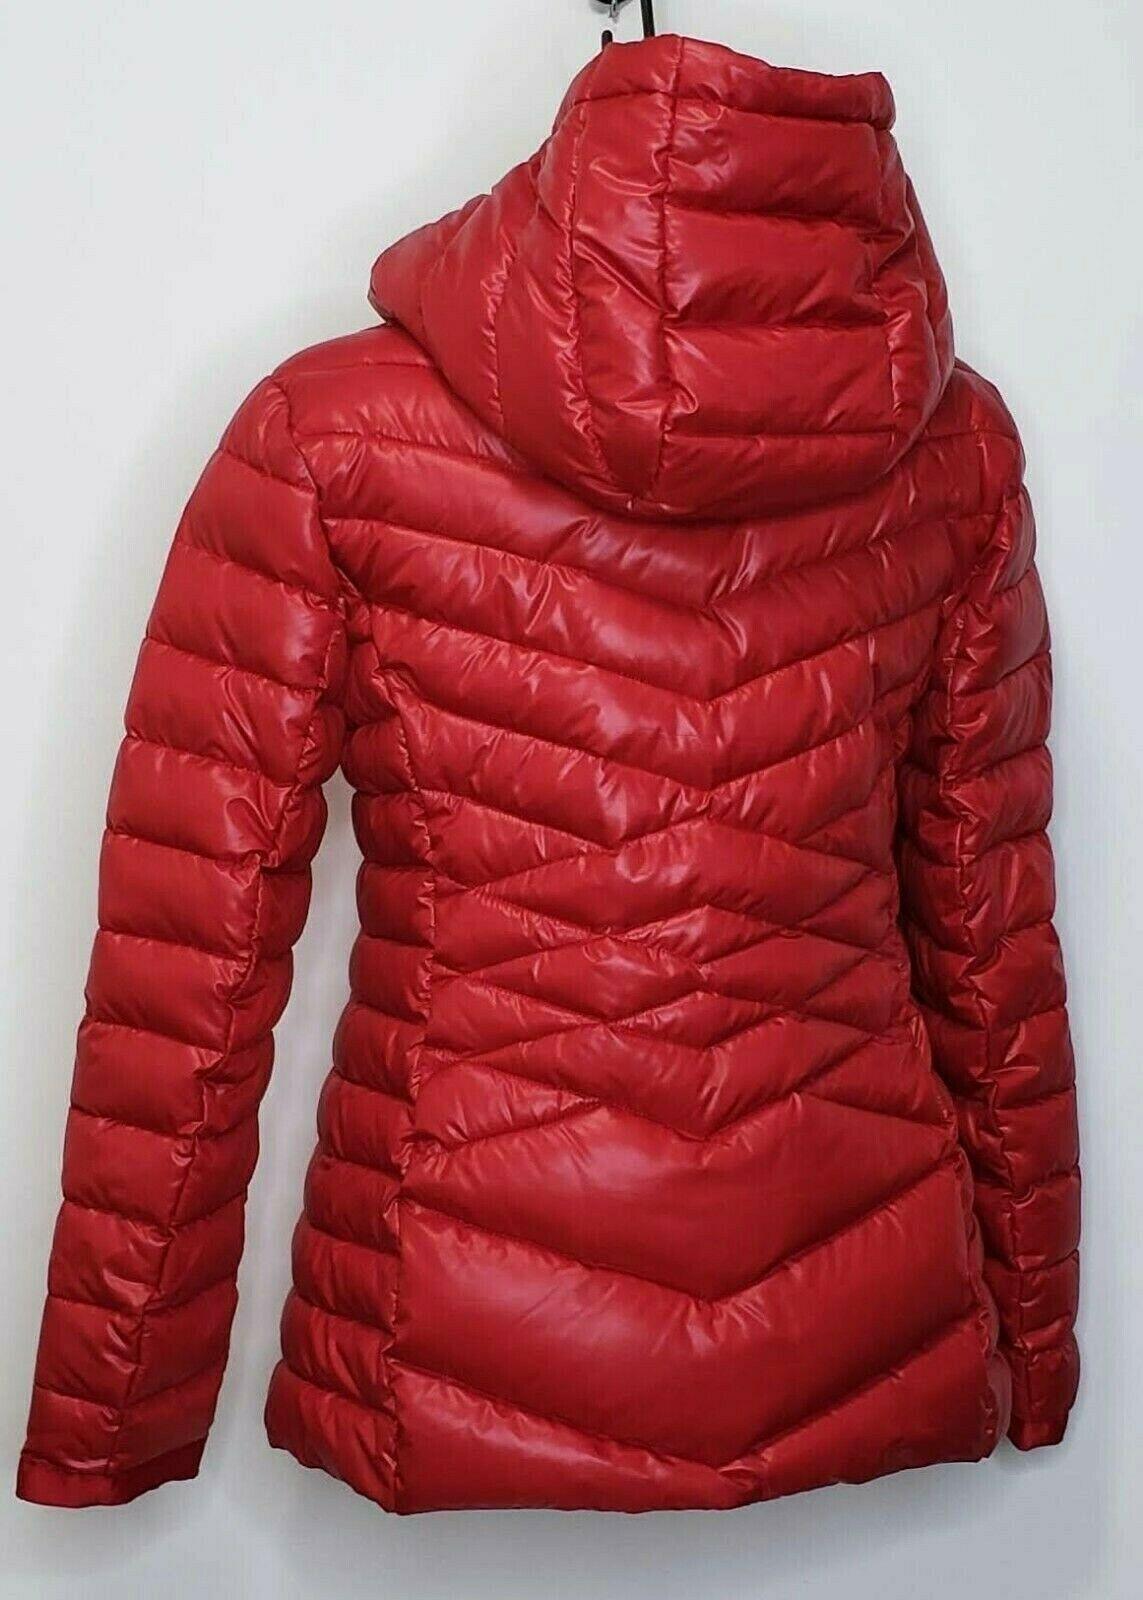 KENNETH COLE REACTION Women's Red Quilted Puffer Hooded Jacket Size S - SVNYFancy